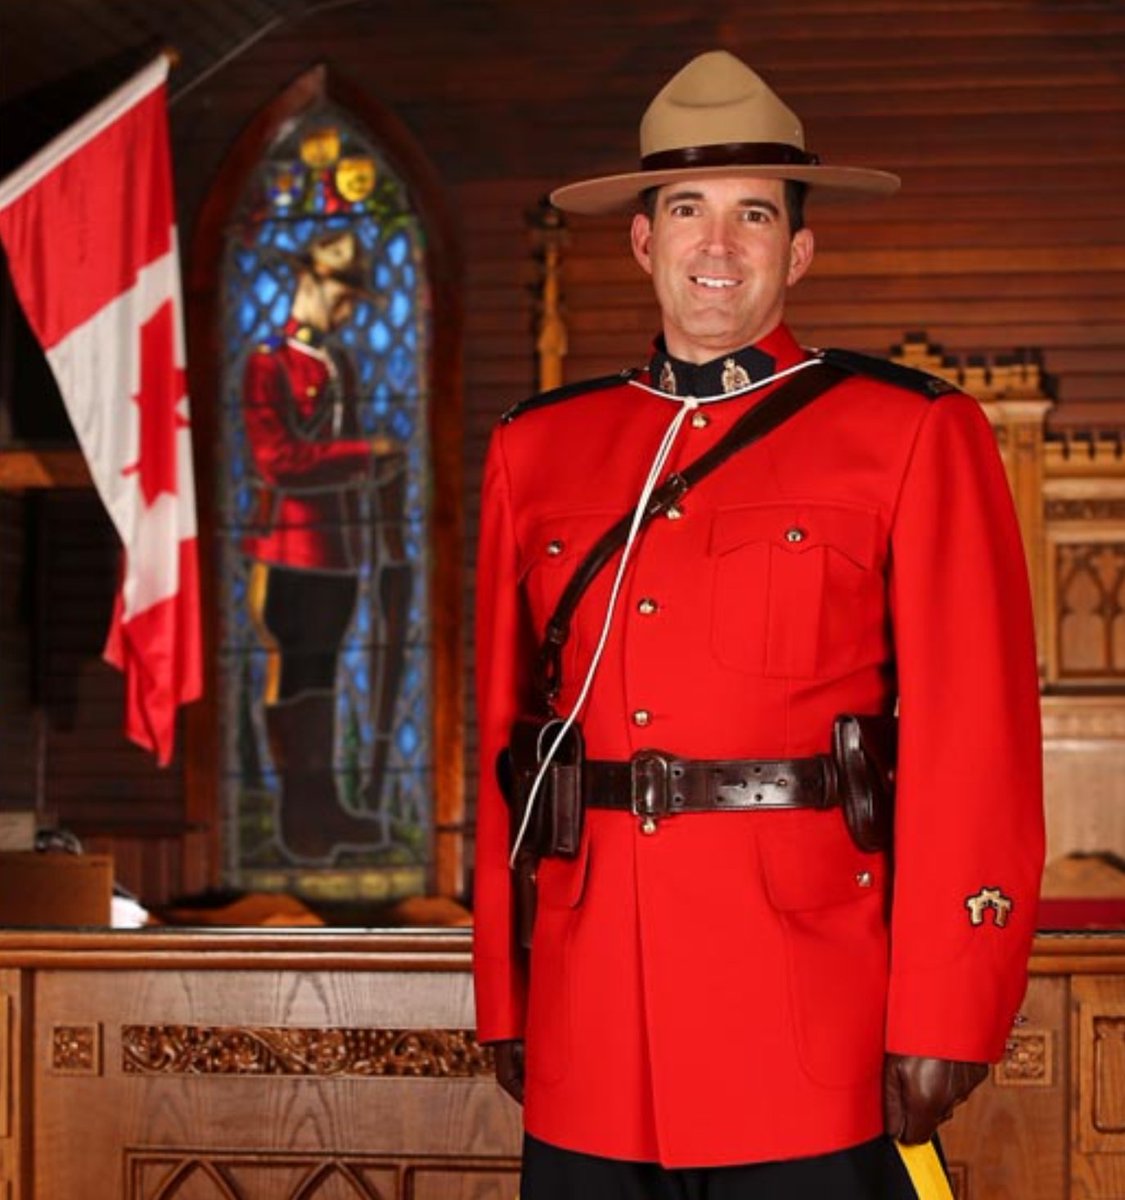 On behalf of #VPD our heartfelt condolences to the family, friends & colleagues of @RidgeRCMP Cst. Rick O'Brien who was tragically killed in the line of duty - your #PoliceFamily across #Canada is mourning & stands with you @rcmpgrcpolice @BCRCMP @npffpn #LODD #EOW @VancouverPD